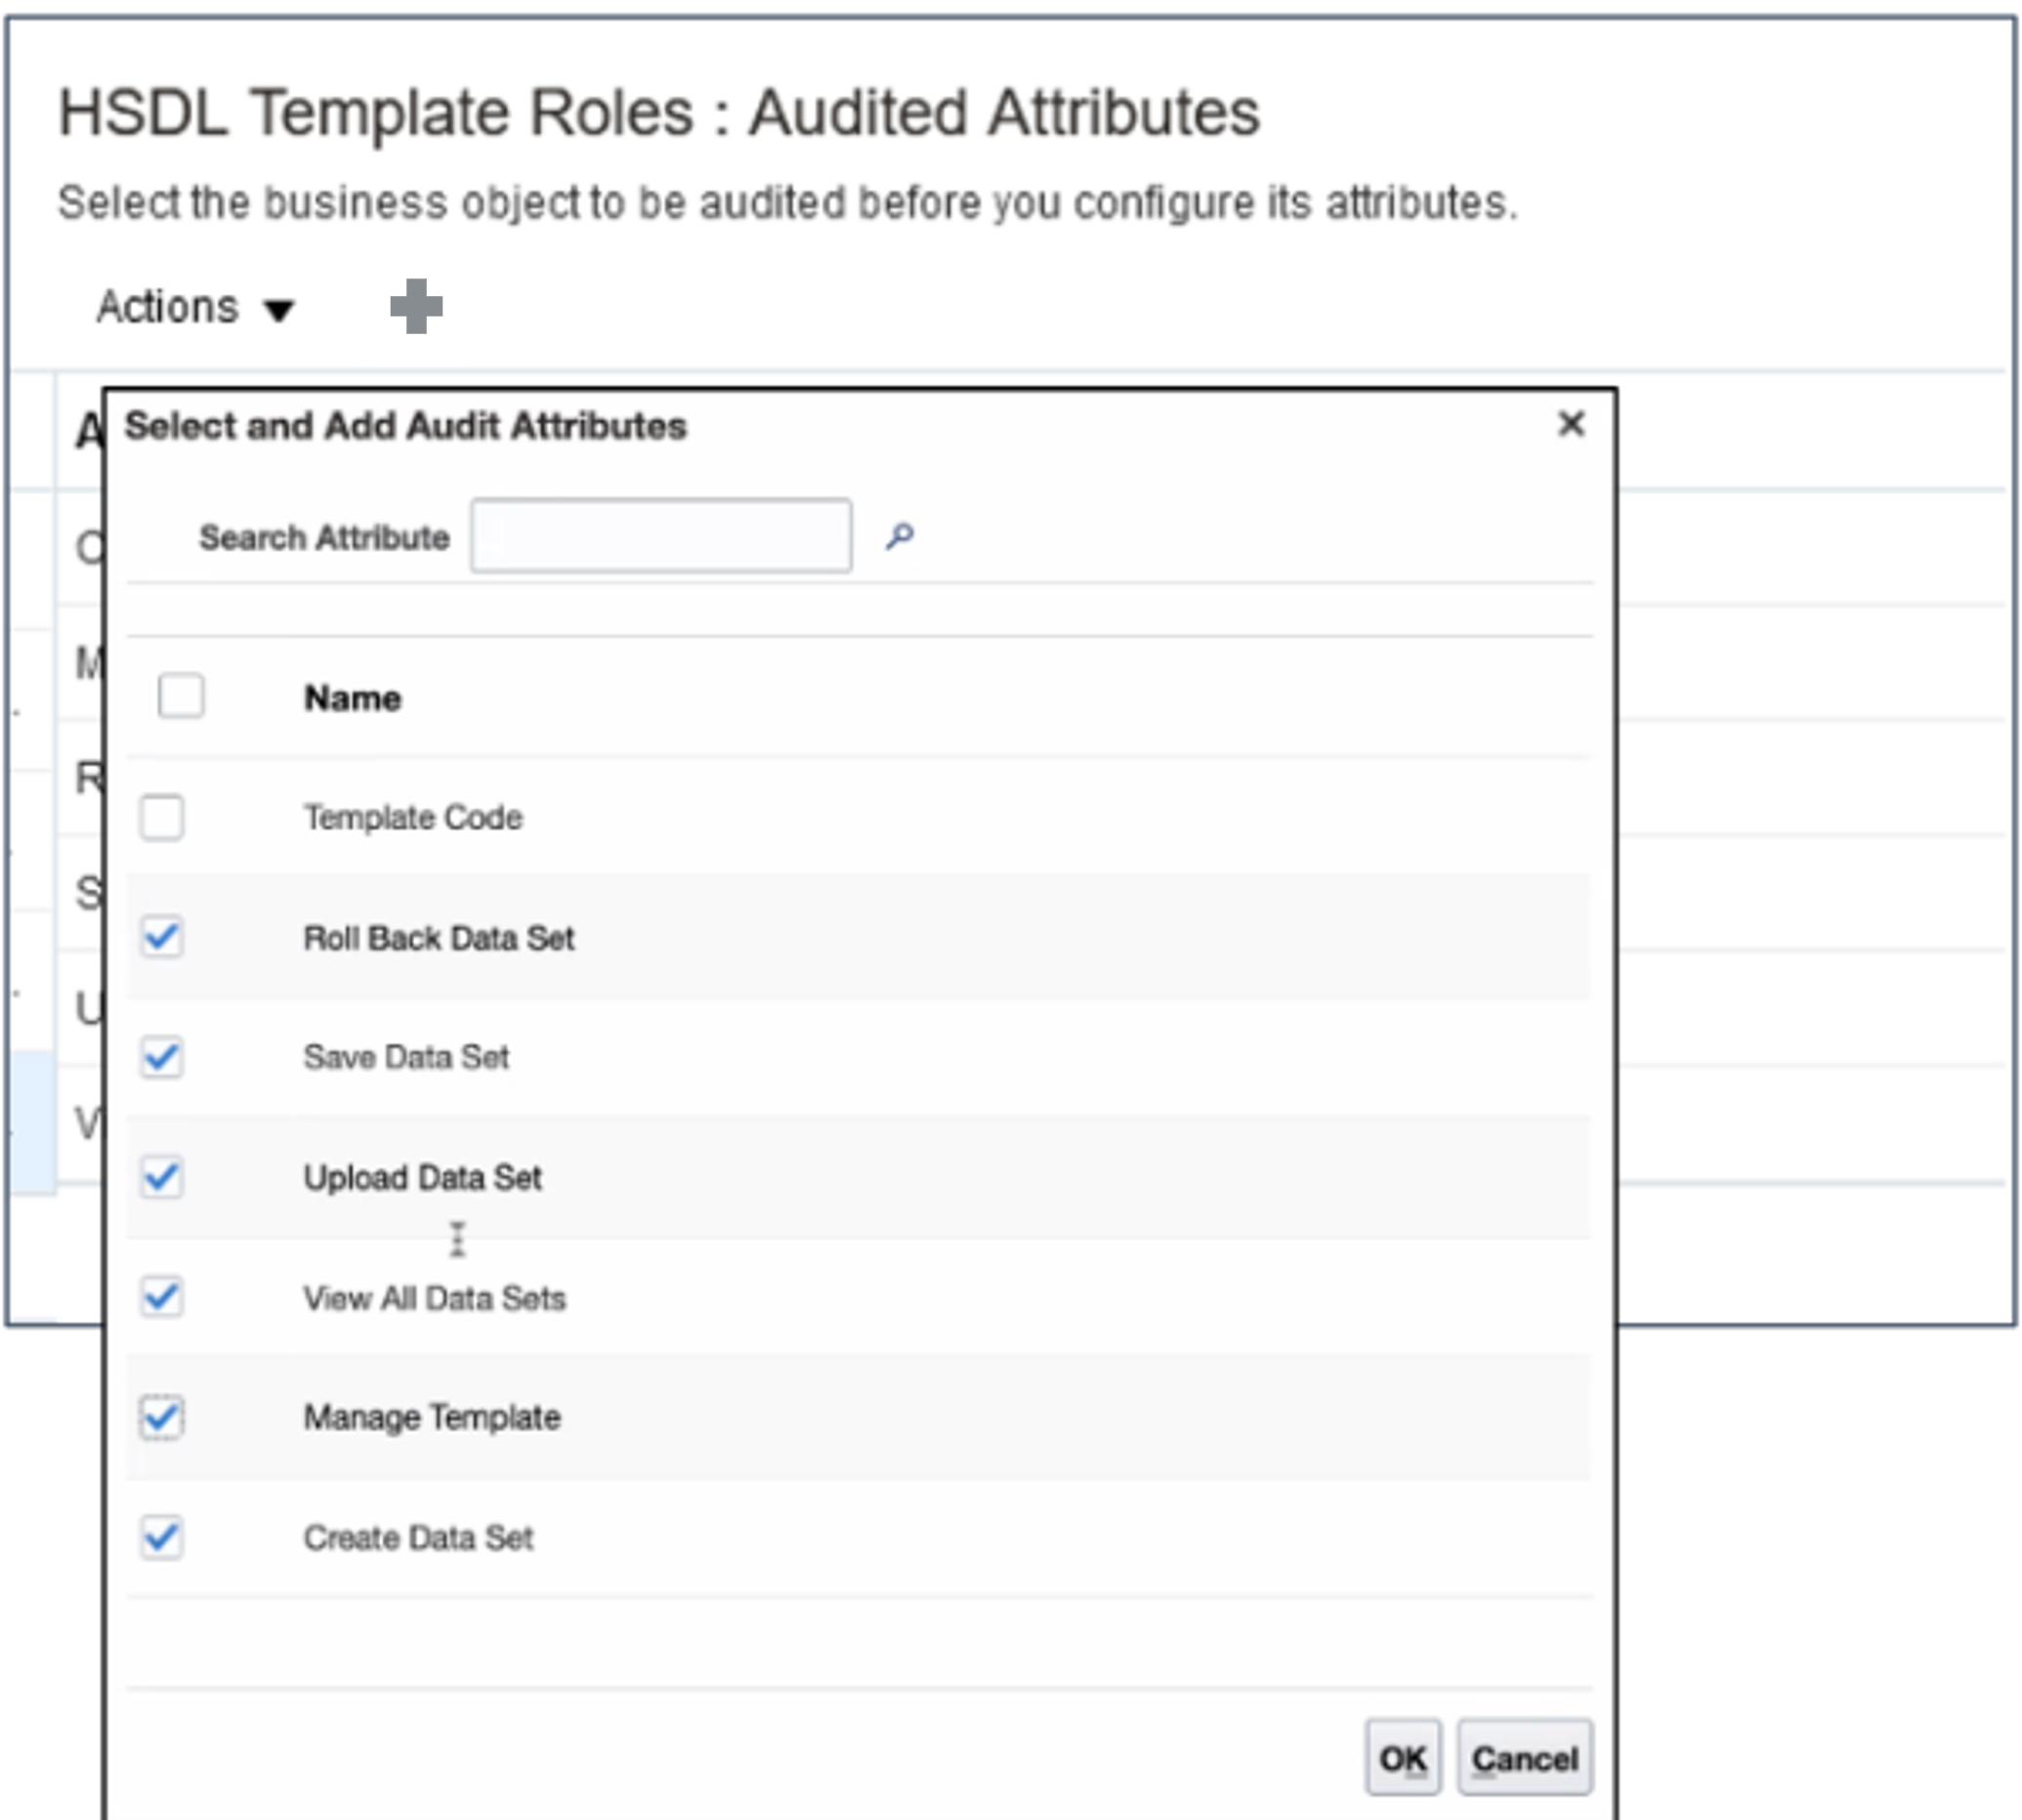 HSDL Template Roles Audited Attributes